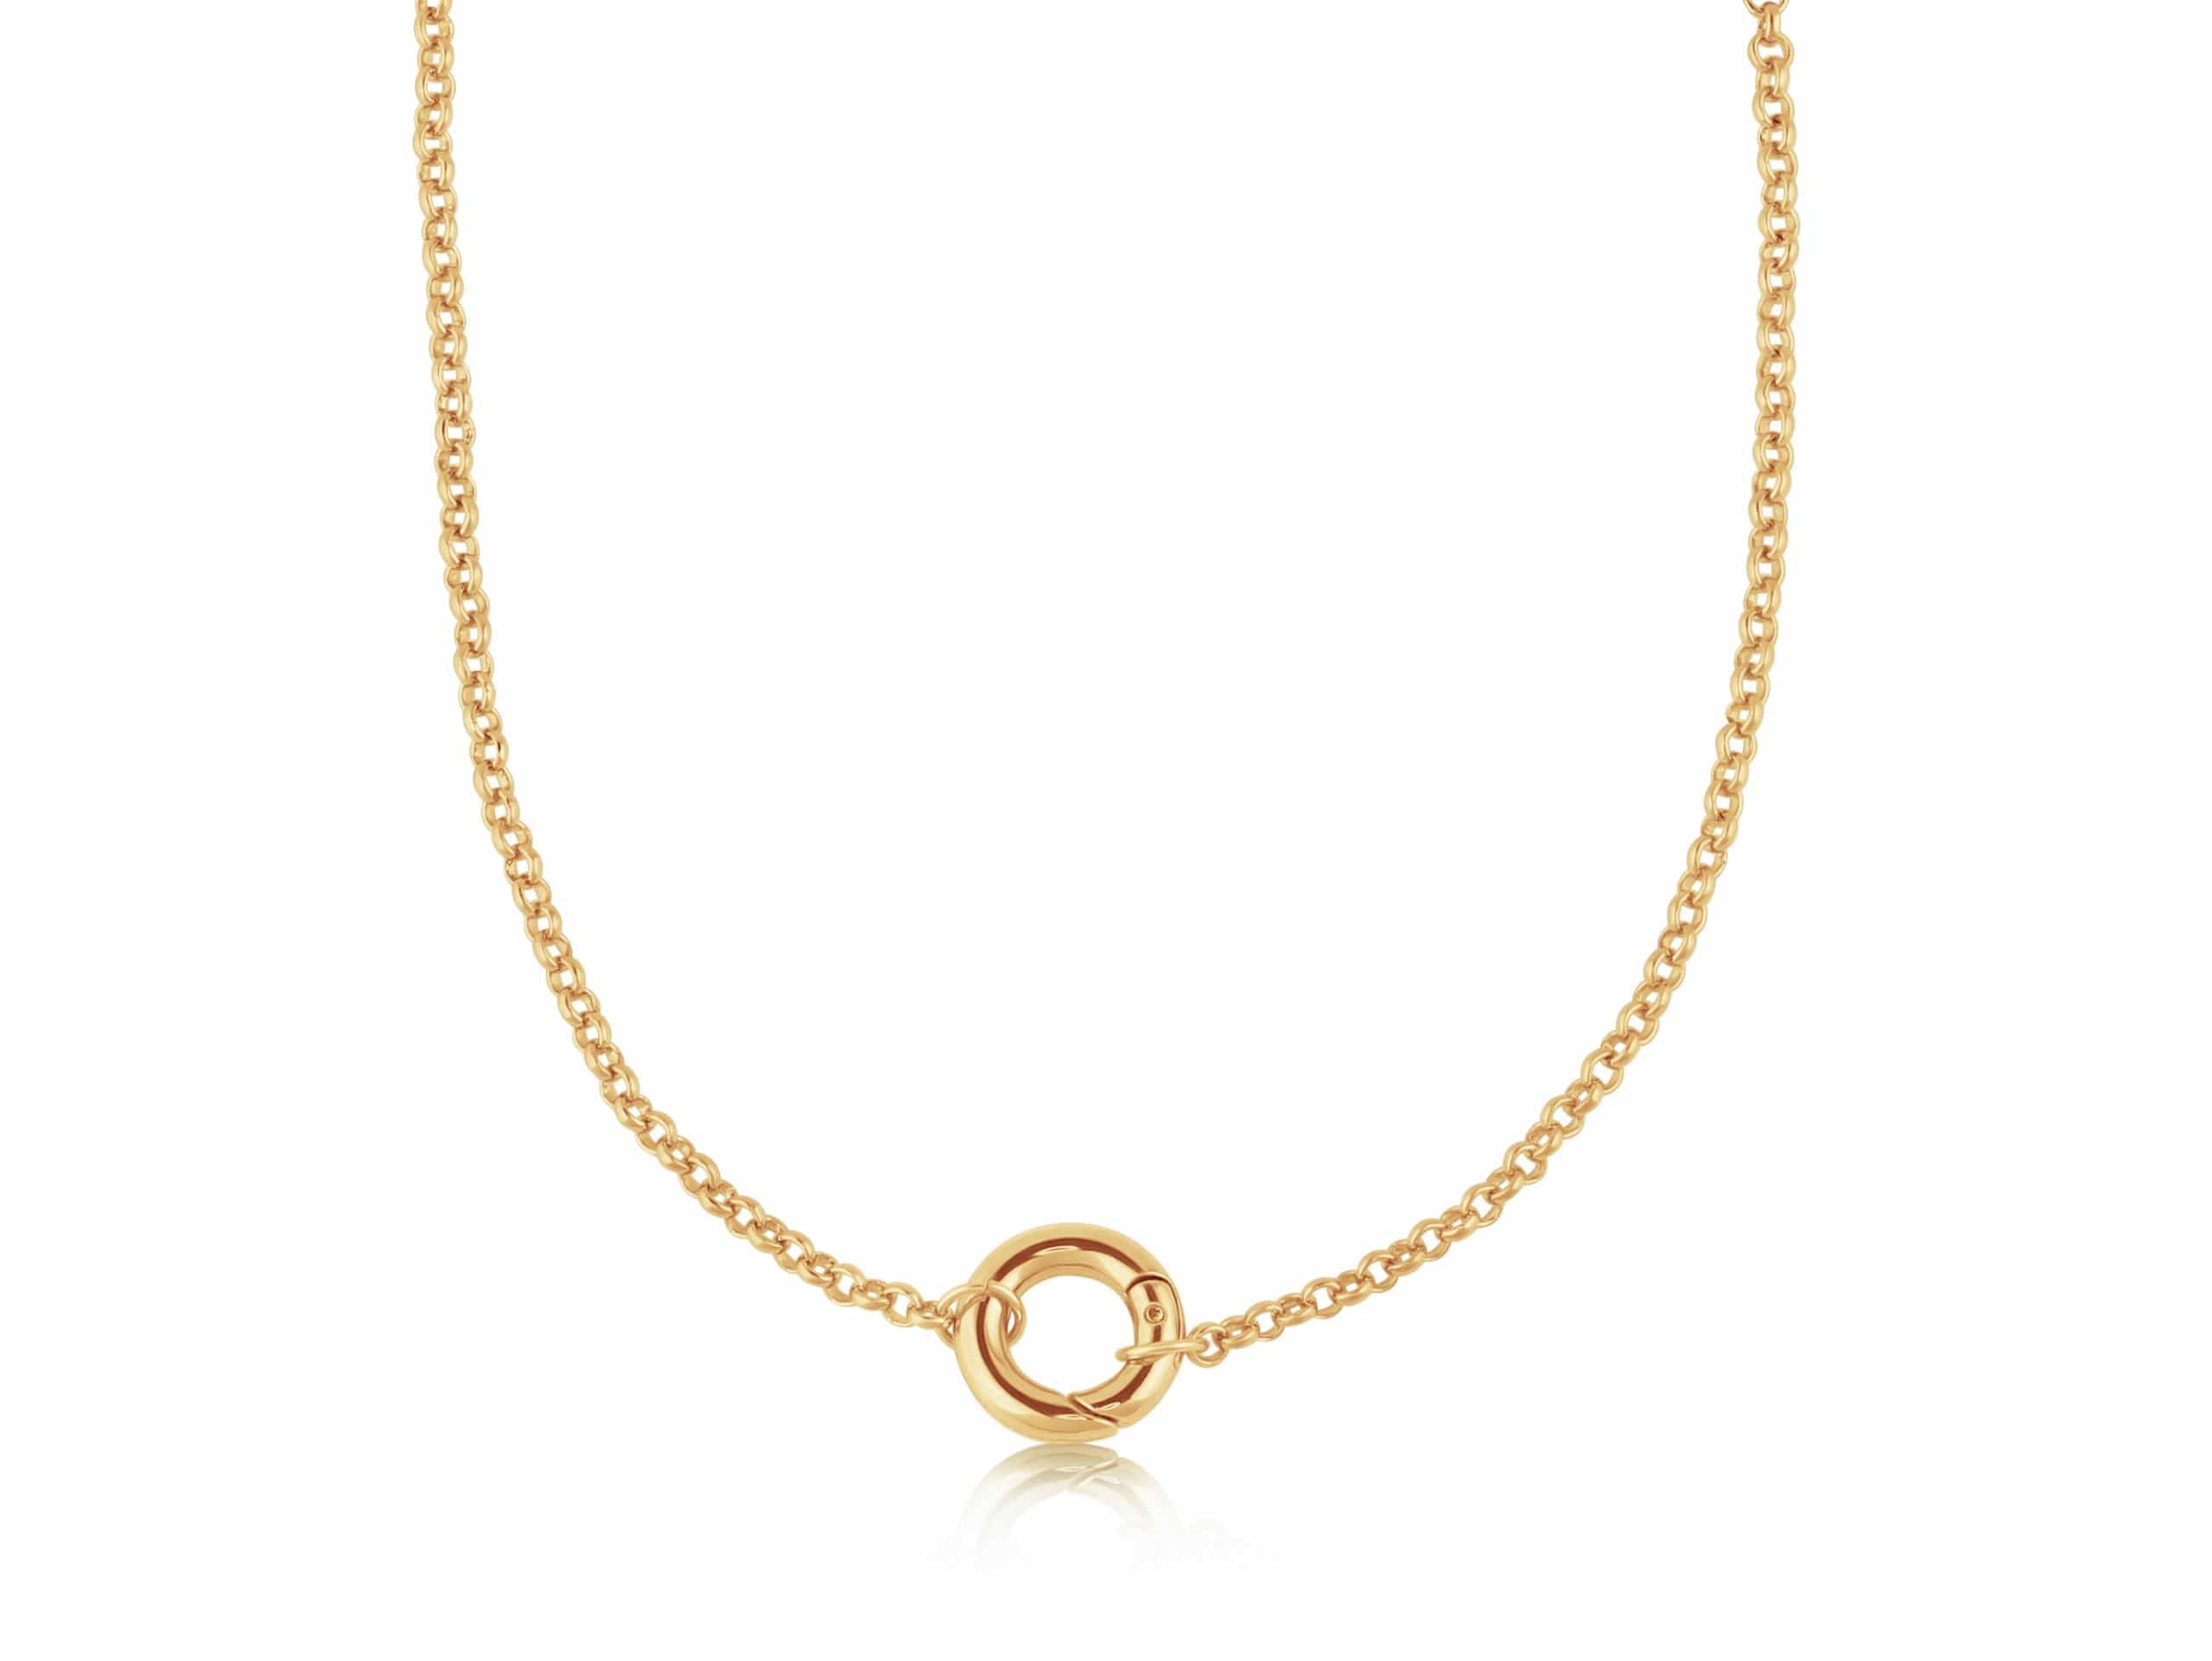 Olivia Mini Brass Belcher Chain Necklace with a Lock in Gold – Big Metal London